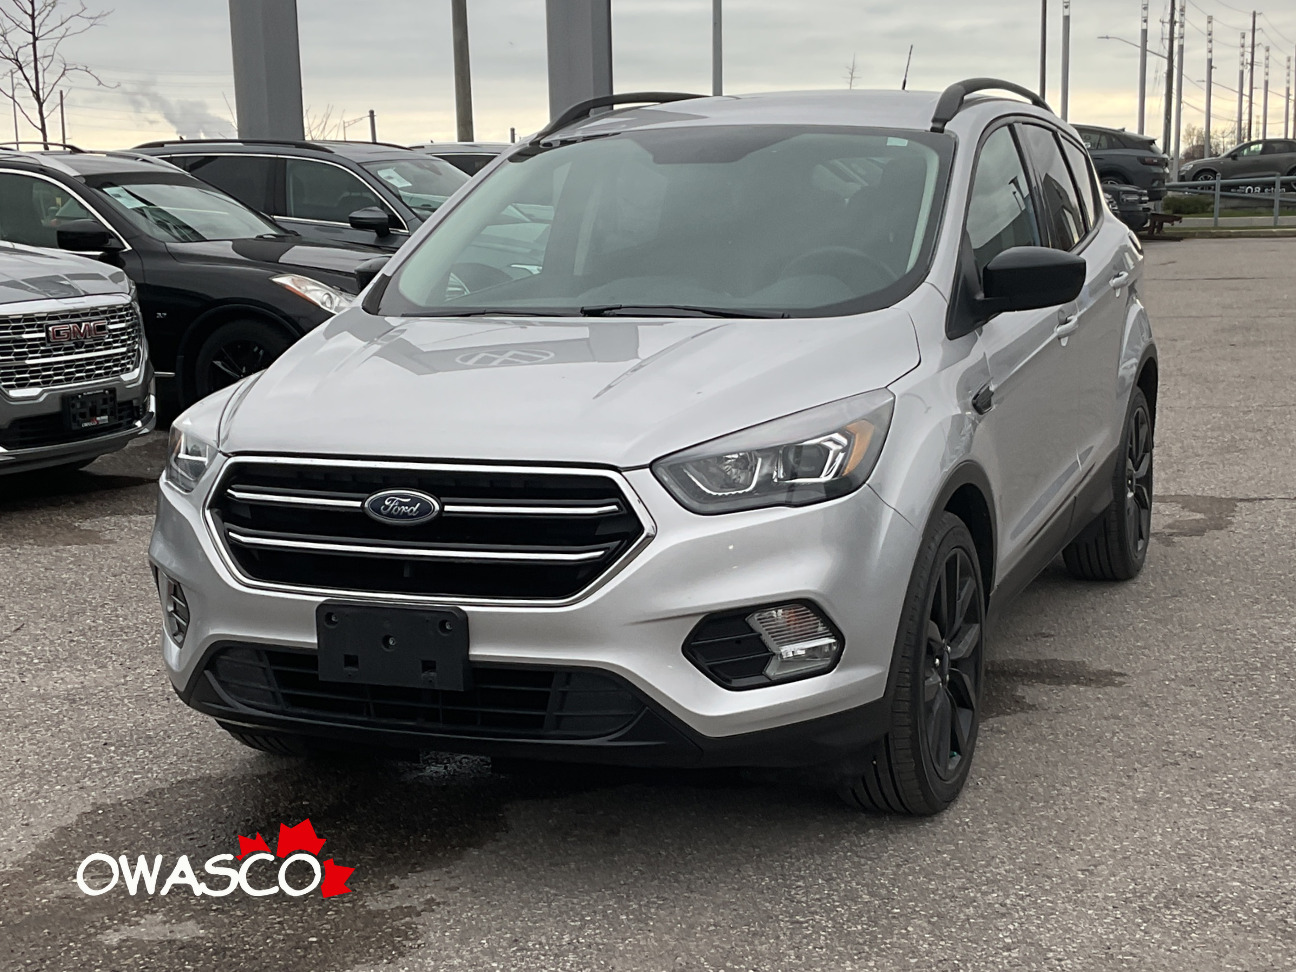 2019 Ford Escape 1.5L SE! FWD! Clean CarFax! Safety Included!